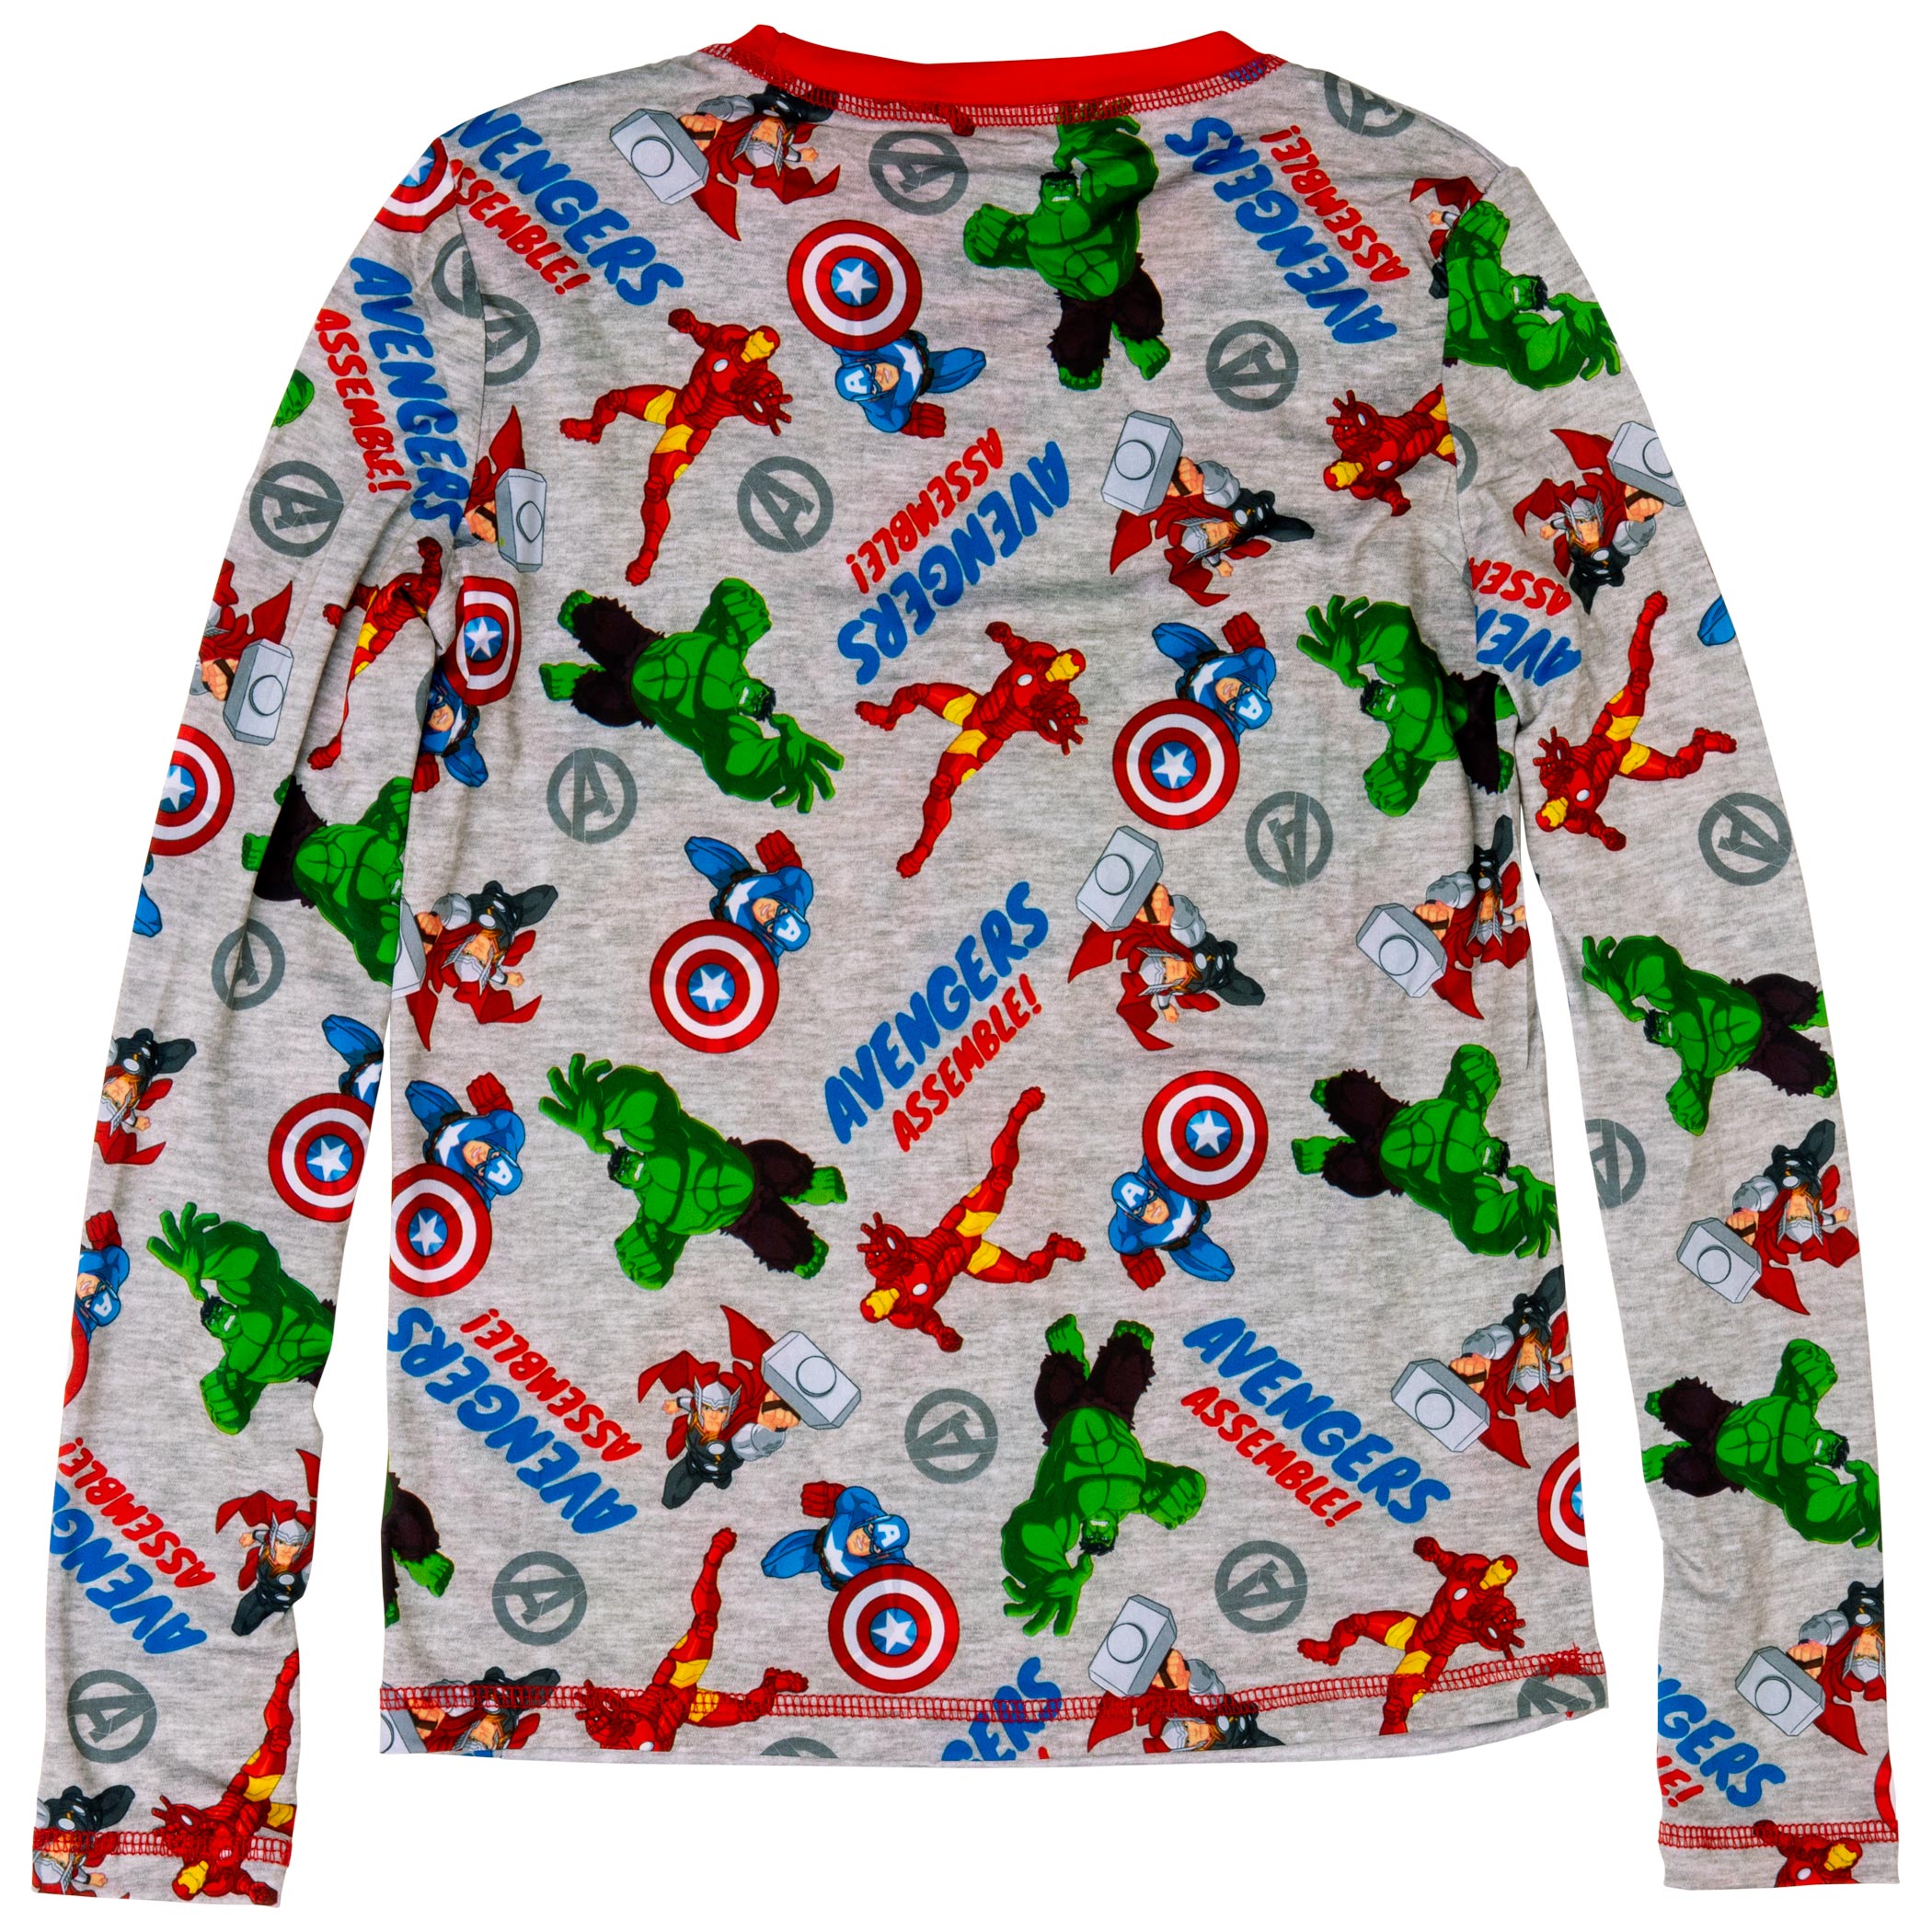 Avengers Characters All Over Print 2-Piece Youth Grey Pajama Set